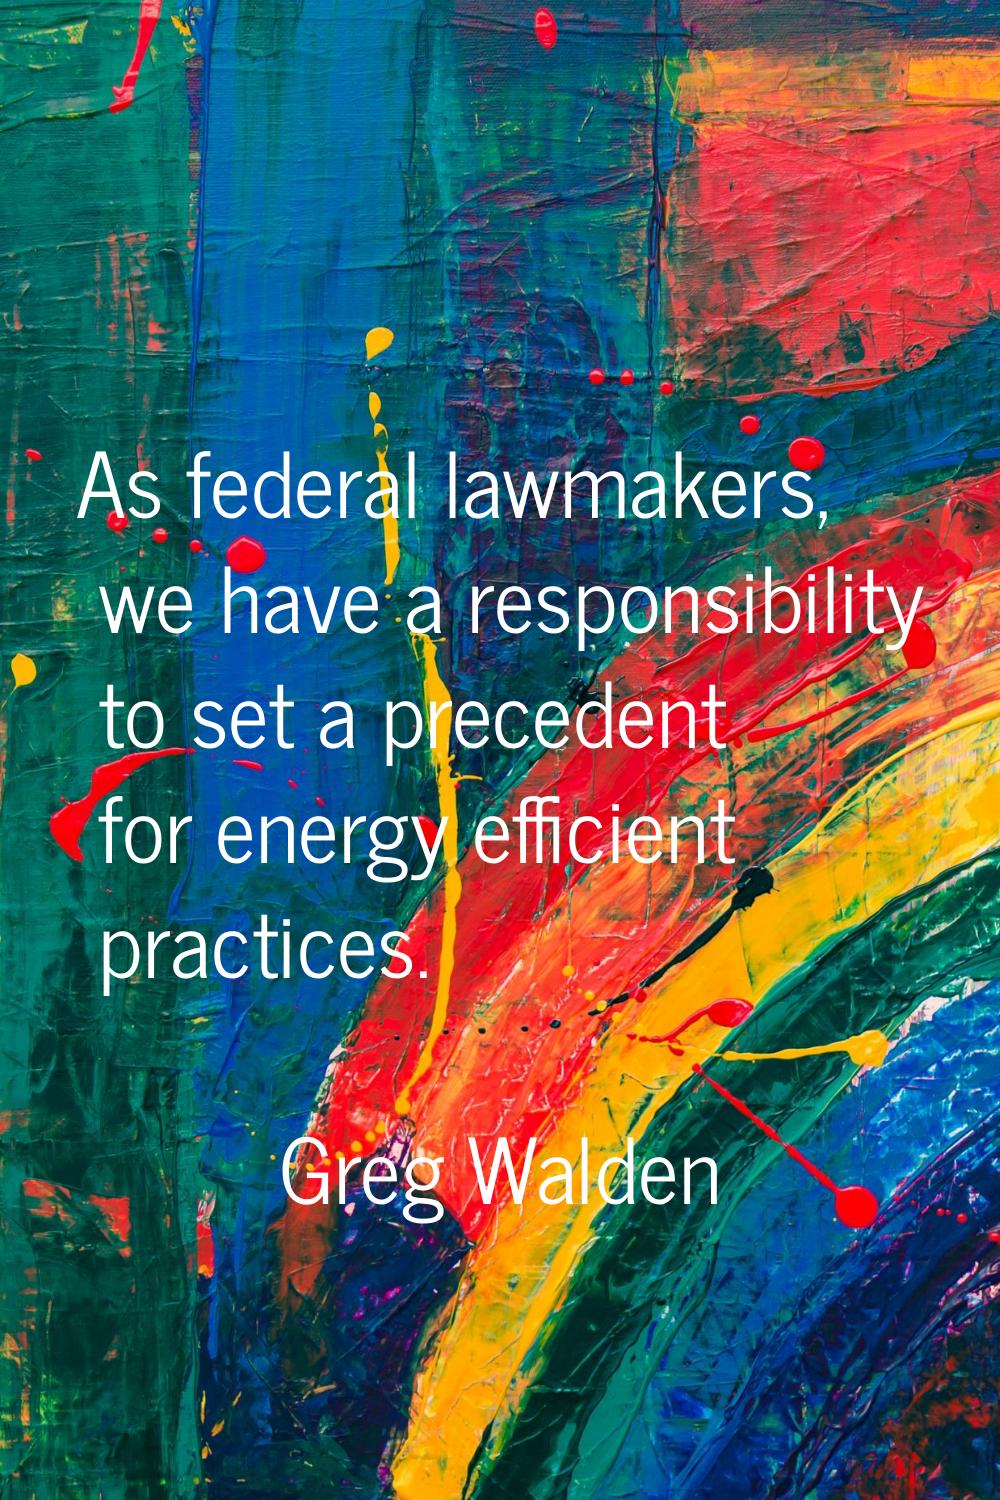 As federal lawmakers, we have a responsibility to set a precedent for energy efficient practices.